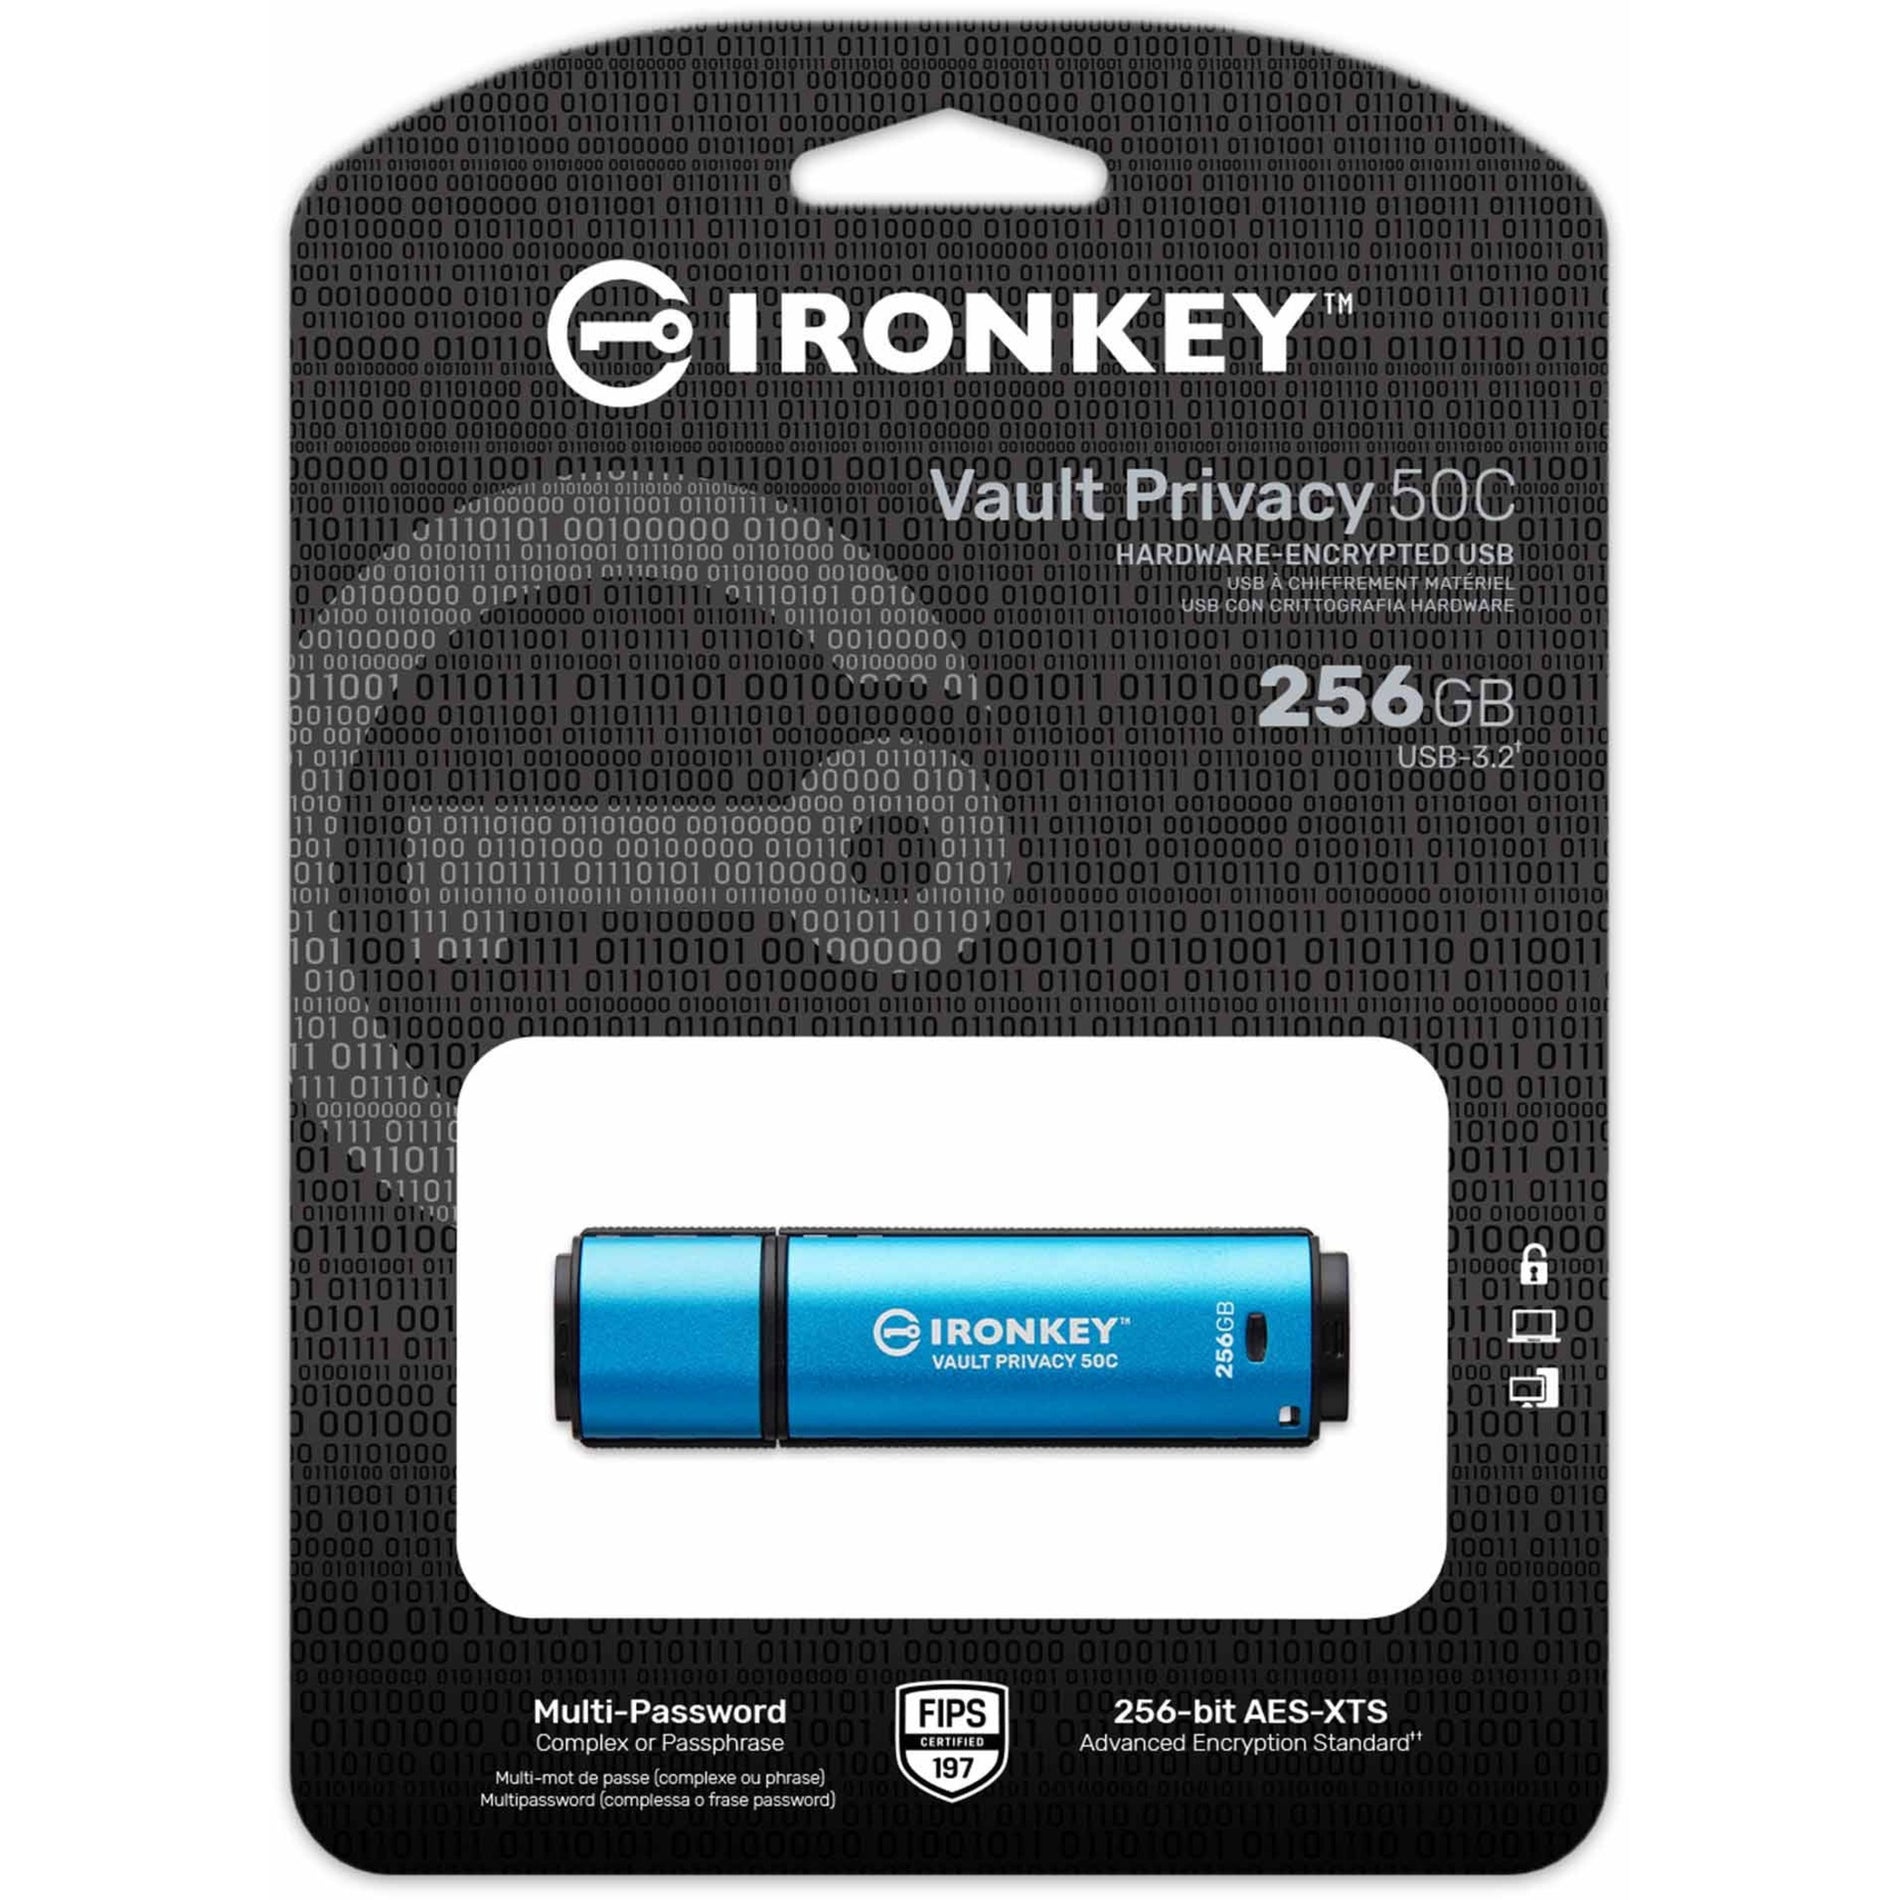 Kingston IKVP50C/256GB Vault Privacy 50 Series 256GB USB 3.2 (Gen 1) Type C Flash Drive, Water Proof, Password Protection, Read-only Mode, Admin and User Mode